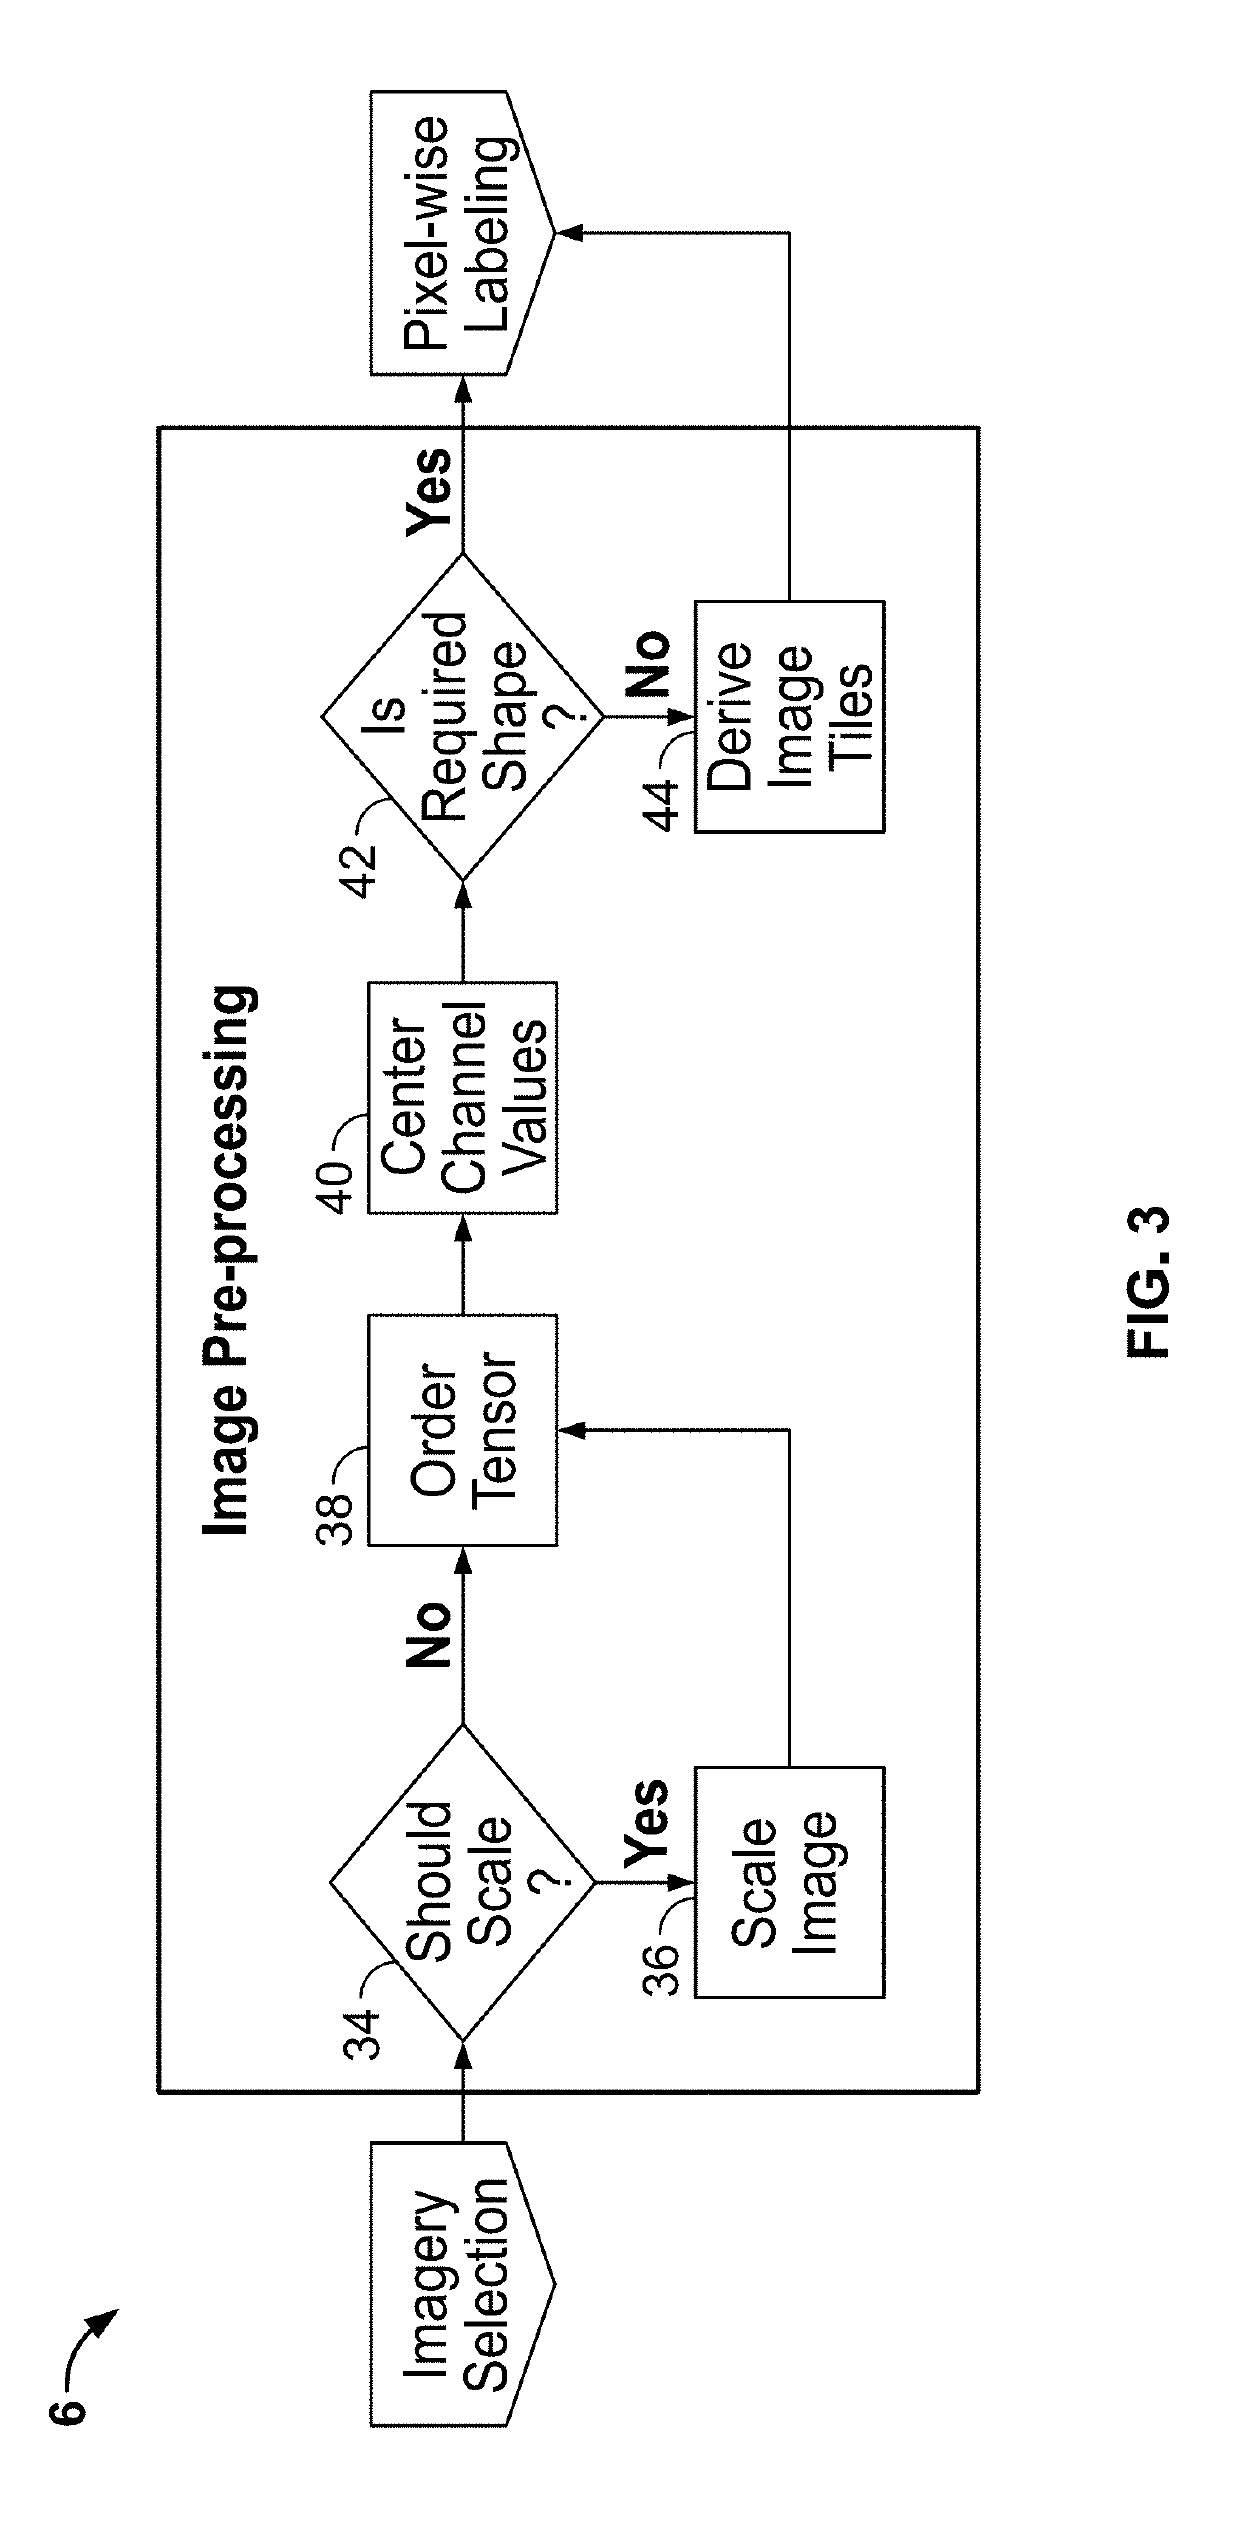 Computer Vision Systems and Methods for Geospatial Property Feature Detection and Extraction from Digital Images